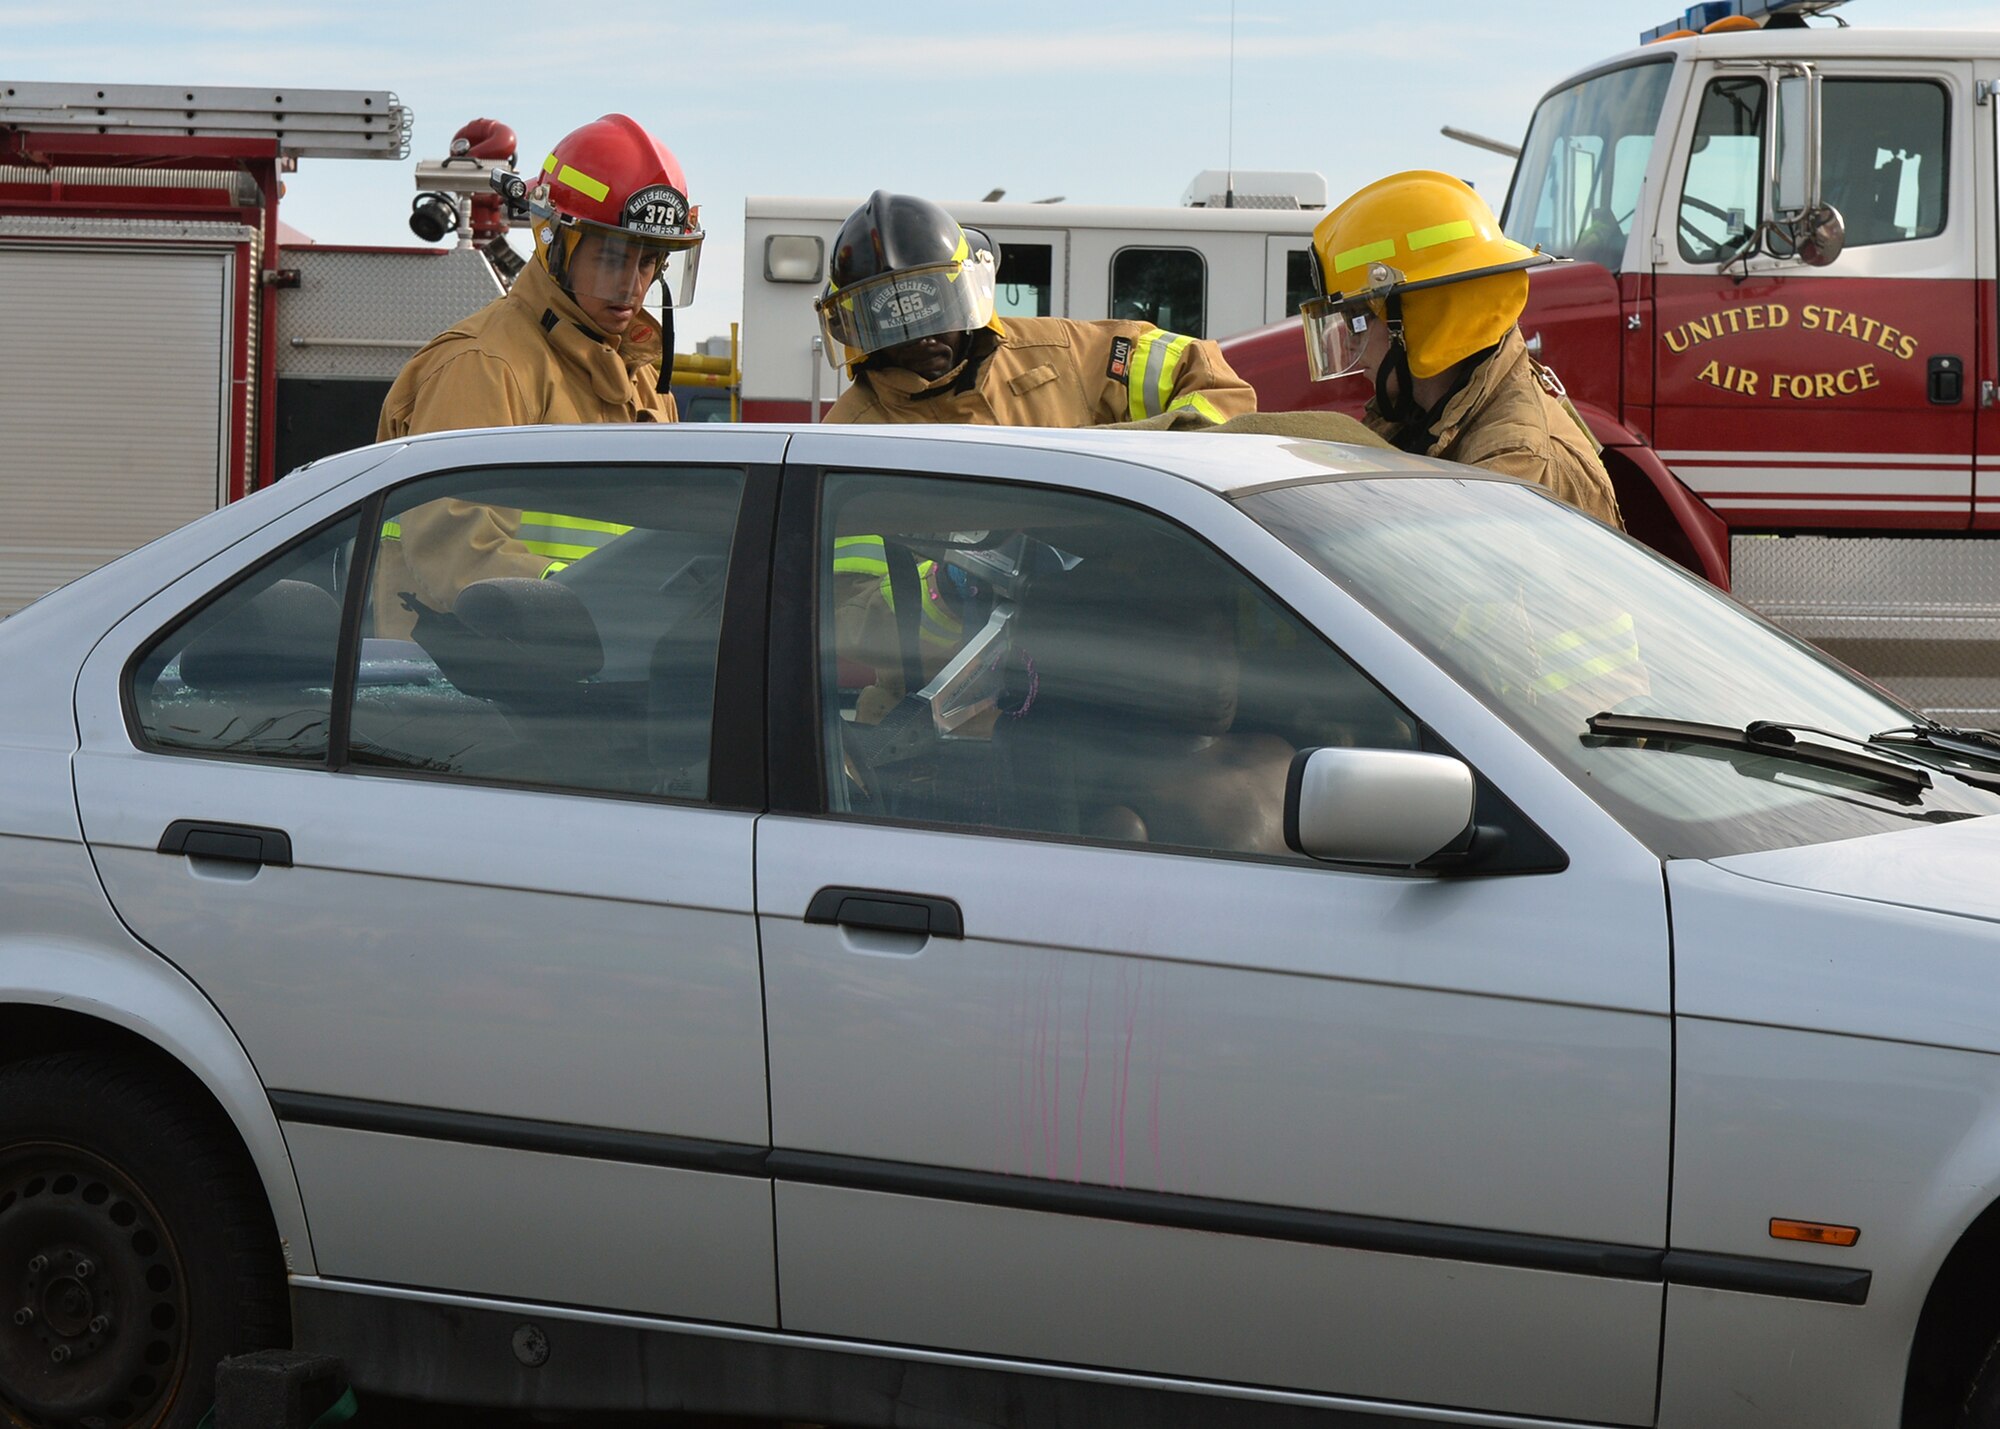 Firefighters from the 86th Civil Engineer Squadron perform an extrication exercise during an open house on Ramstein Air Base, Germany, Oct. 6, 2018. During Fire Prevention Week, members of the Kaiserslautern Military Community Fire and Emergency Services helped familiarize families with the importance of fire safety and how firefighters can help in emergency situations. (U.S. Air Force photo by Staff Sgt. Jimmie D. Pike)